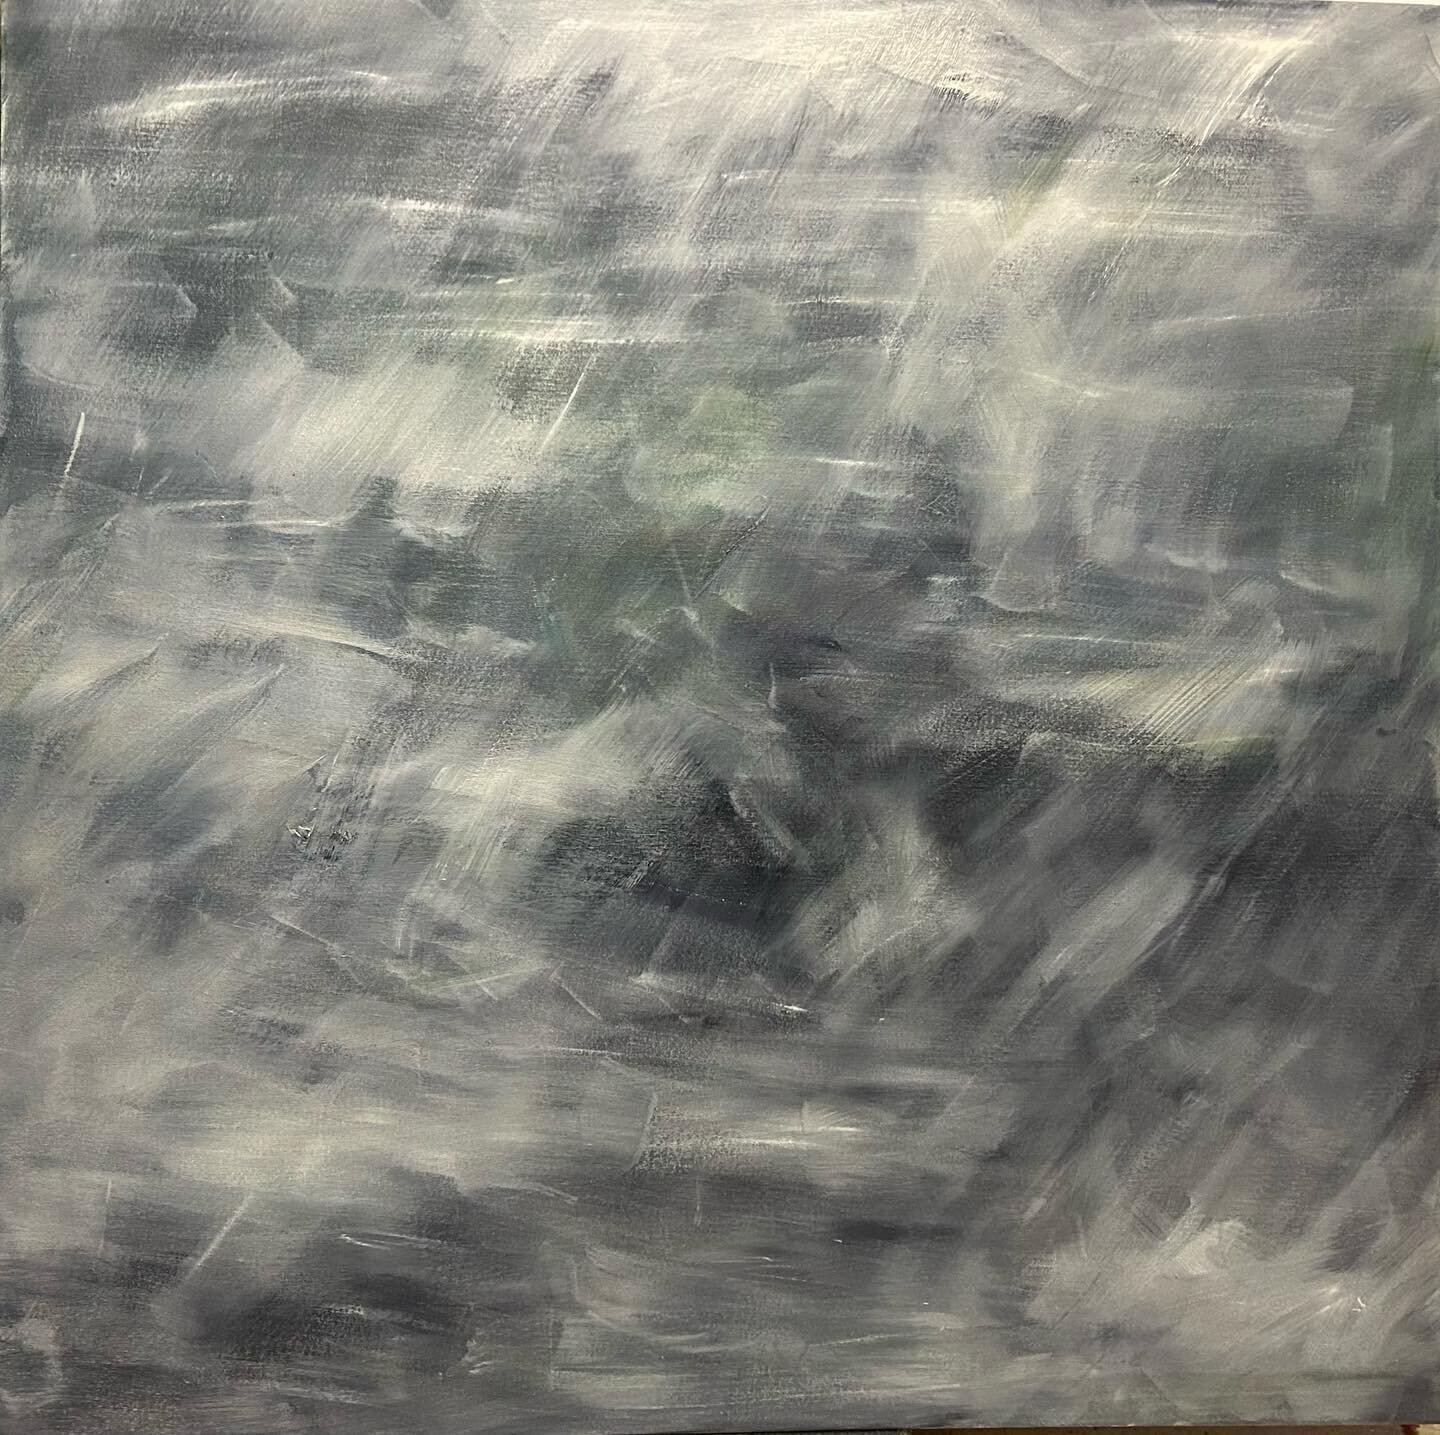 Haar 57 inch x 57 inch oil on canvas 2022 #abstract #abstractart #abstractpainting #abstractartist #abstraction #abstractexpressionism #moderna #abstracts #abstract_art #acrylicpainting #painting #abstractartwork #abstractphoto #abstracters_anonymous